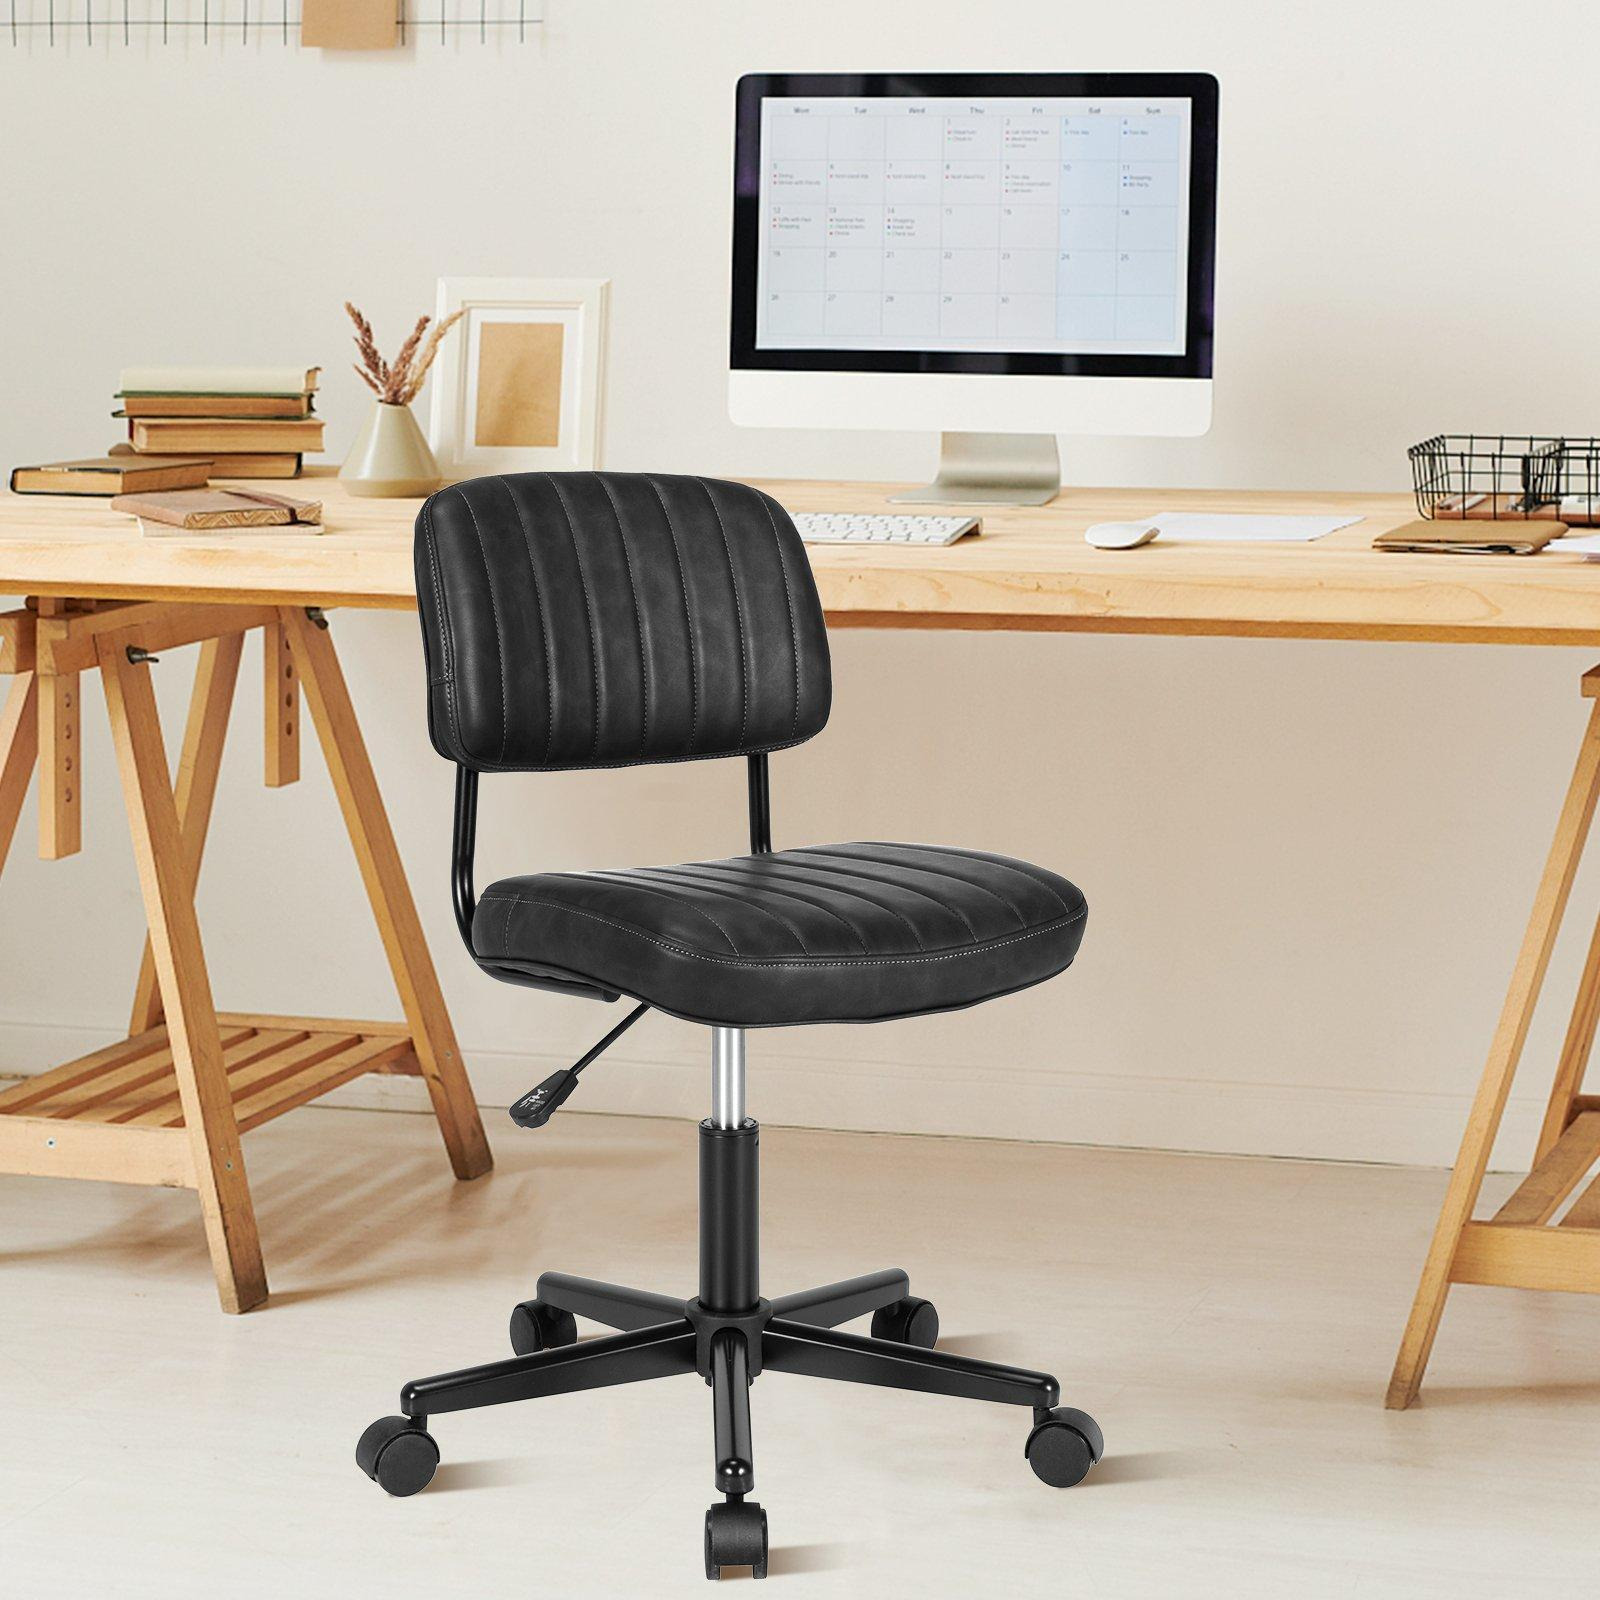 Swivel PU Leather Office Chair Height Adjustable Rolling Computer Desk Chair - image 1